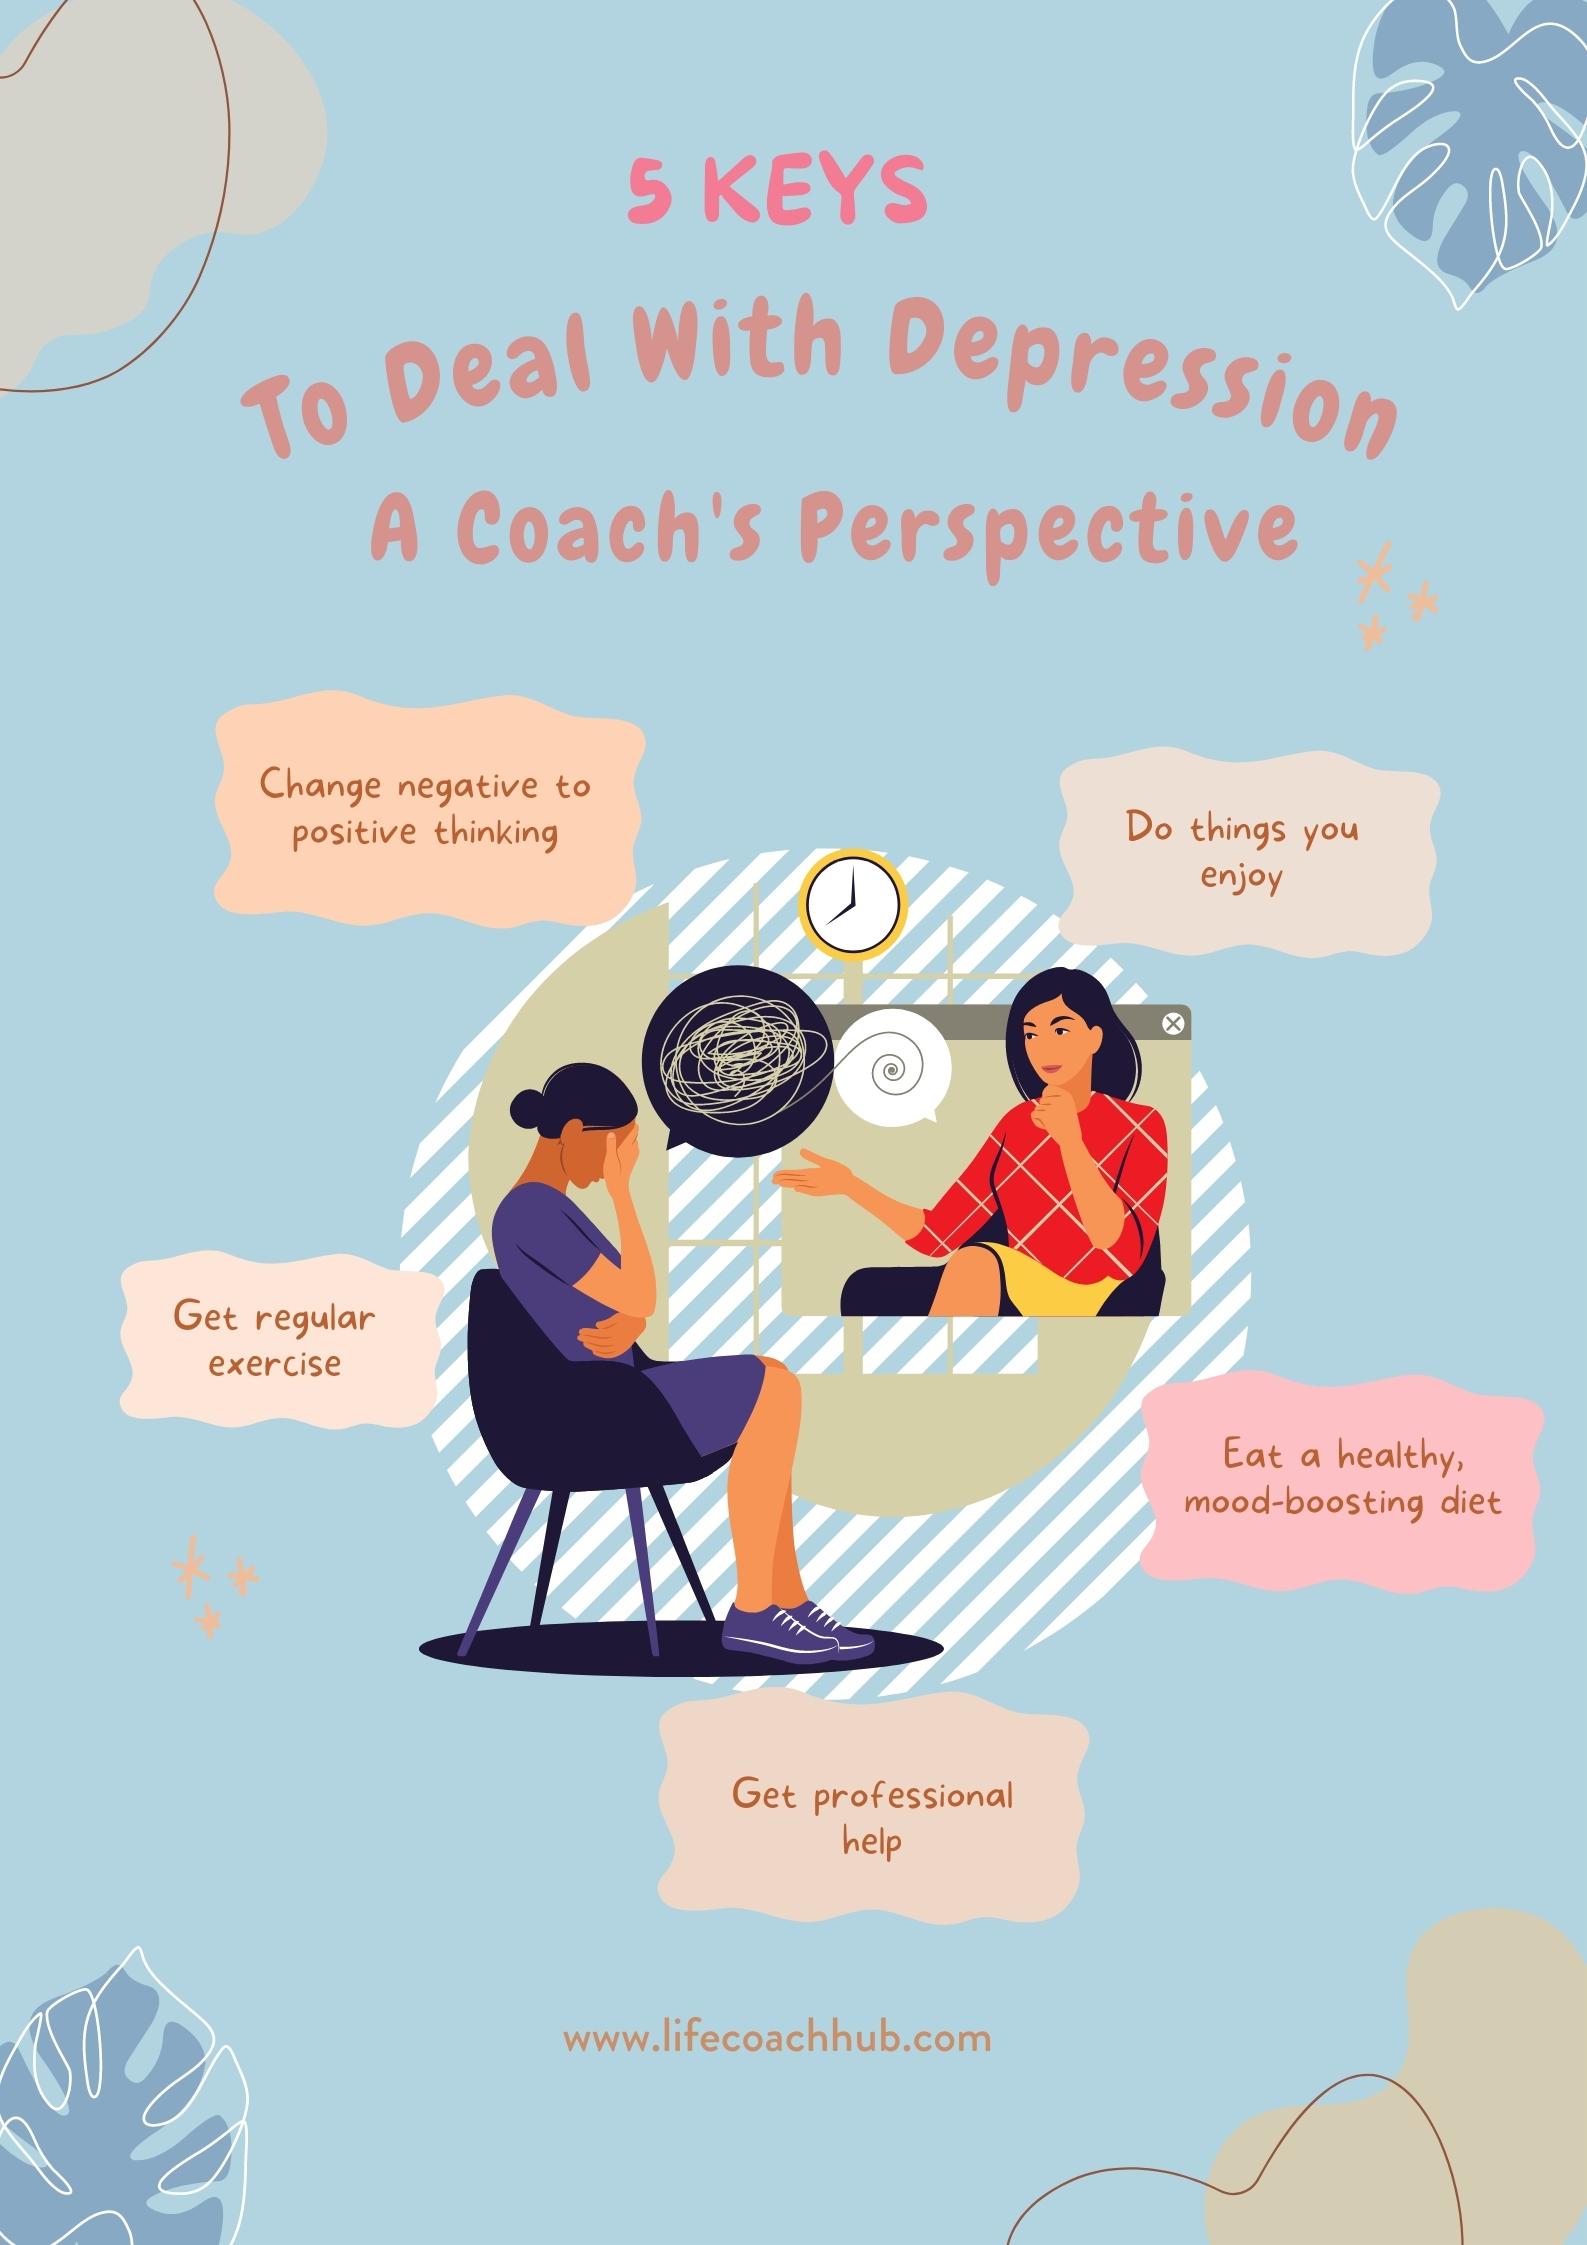 Keys to deal with depression coaching tip